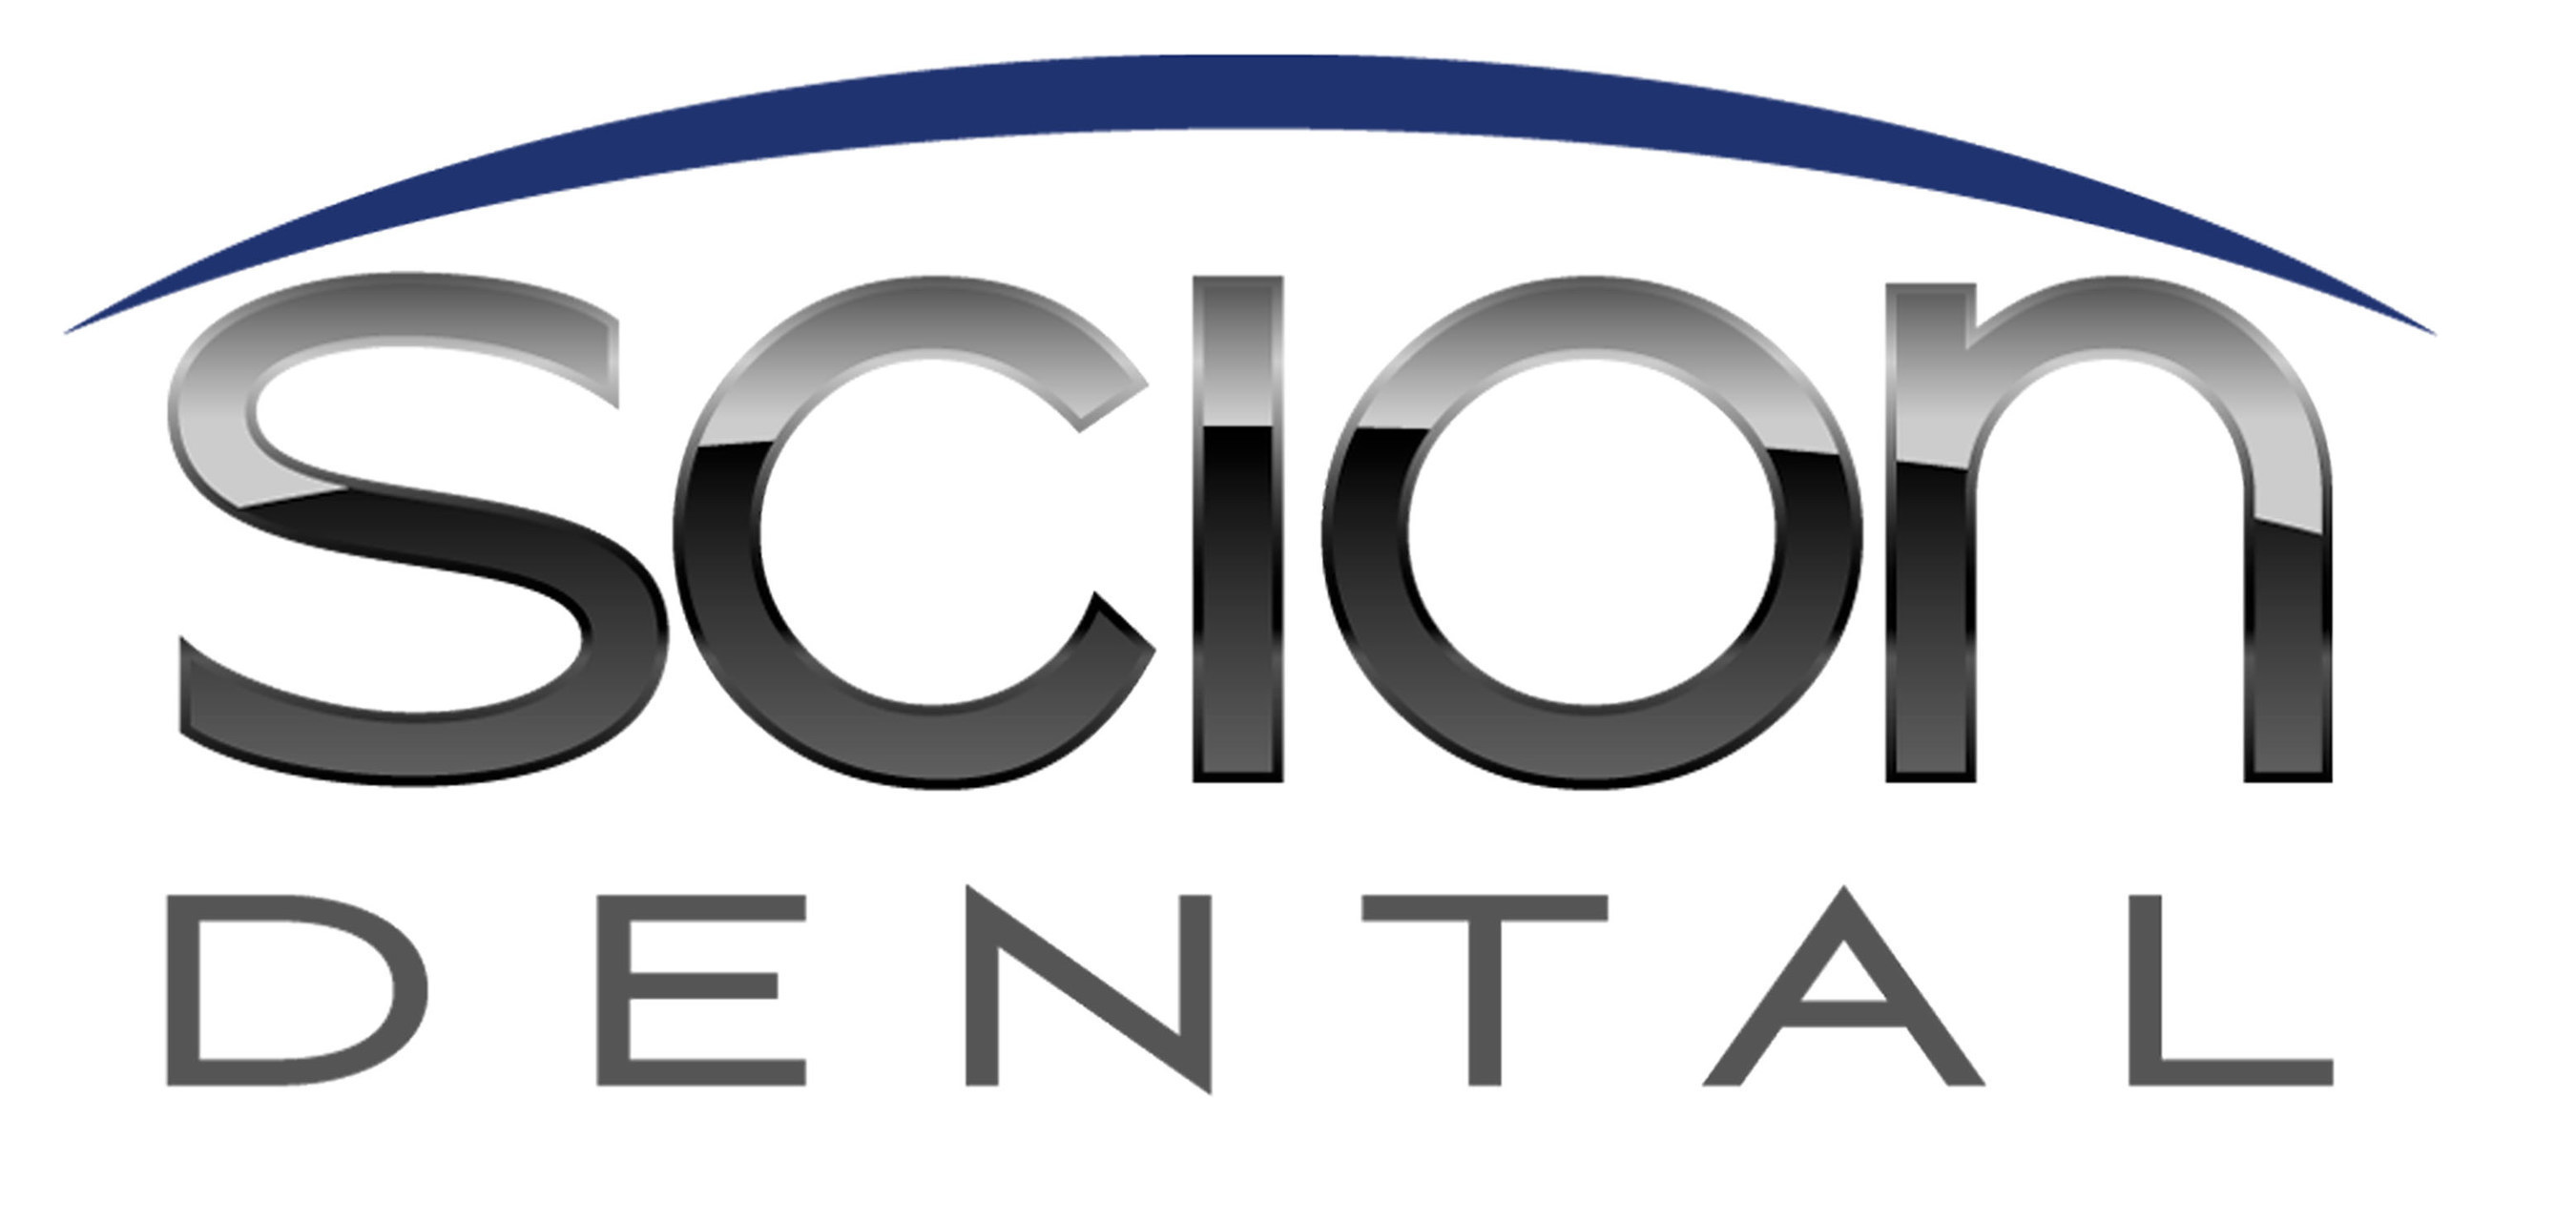 Scion Dental is a distinguished dental benefit administration company focused on bringing next-generation claims management and technology solutions together for government entities and commercial payers that enable them to improve process efficiencies, achieve compliance, and dramatically reduce the cost of delivering benefits. Because of dedicated workflows focused on preventing fraud and abuse, millions of people, including America's children, receive the quality dental care they need.